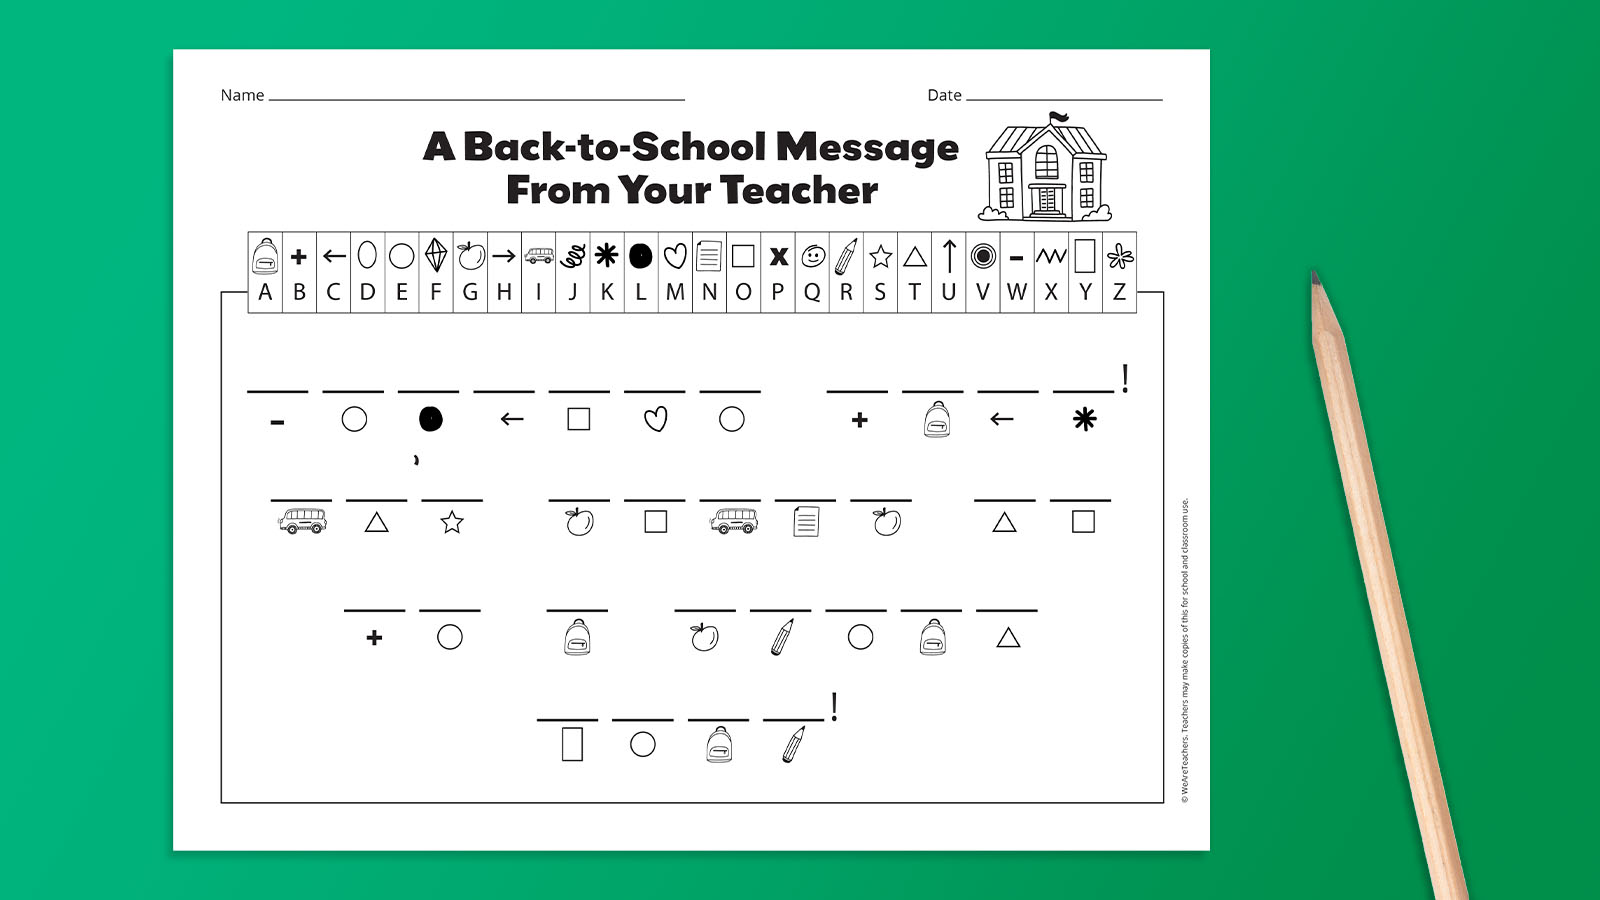 Back-to-School message secret code on green background.